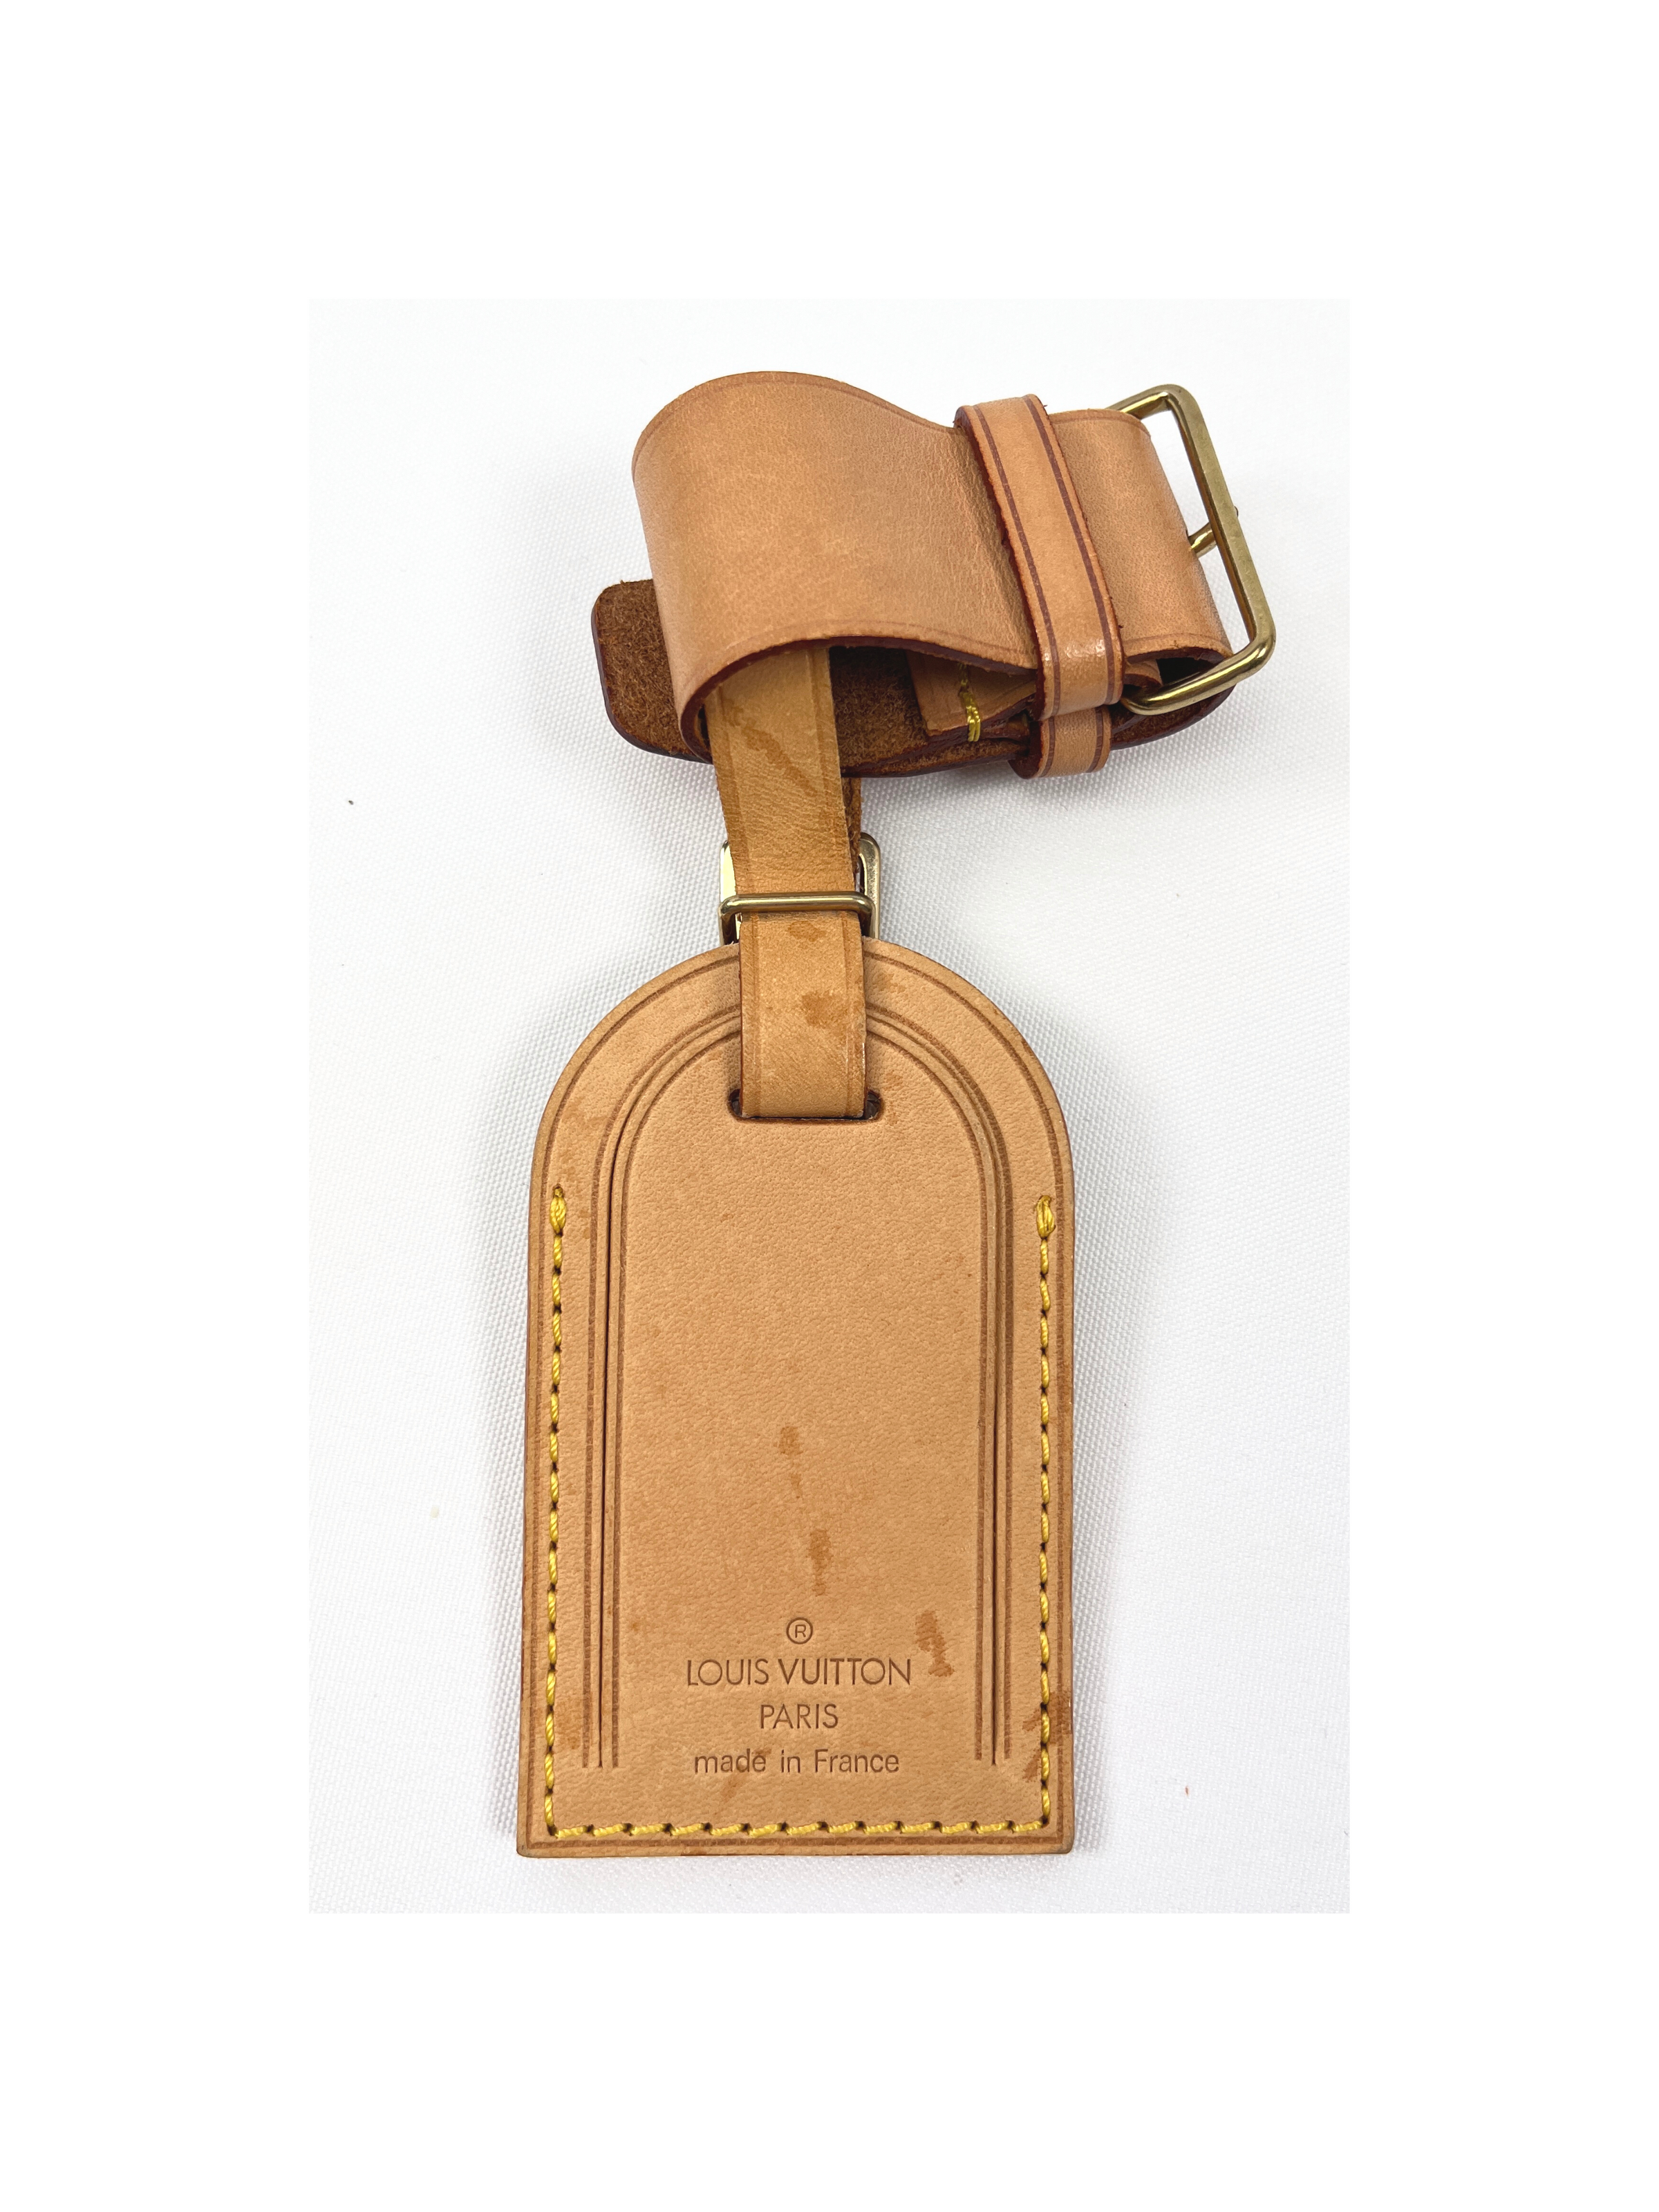 Louis Vuitton Vachetta Leather Luggage Tag and Poignet 152lvs25 –  Bagriculture